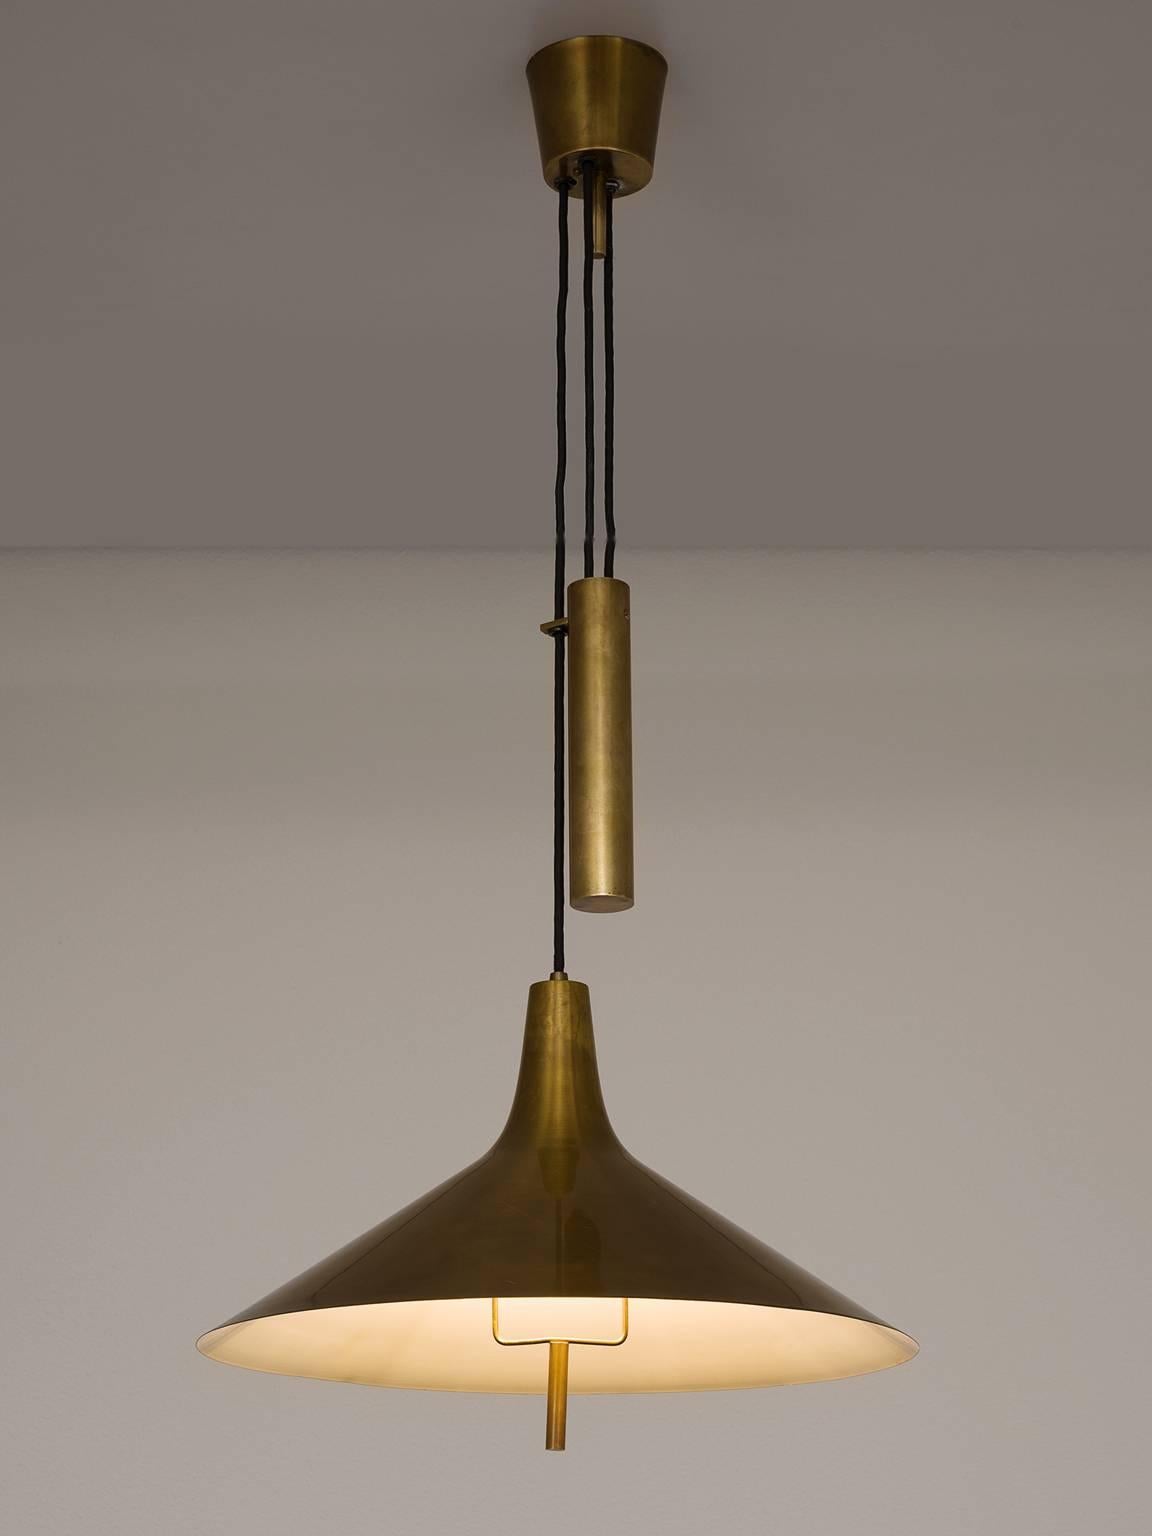 Pendants, brass, Denmark, 1960s

This set of elegant, warm pendants is produced in Denmark. The slender shade and counter weight make a modest yet elegant lamp. The patinated brass form a great balance with the functional design. 

Free shipping